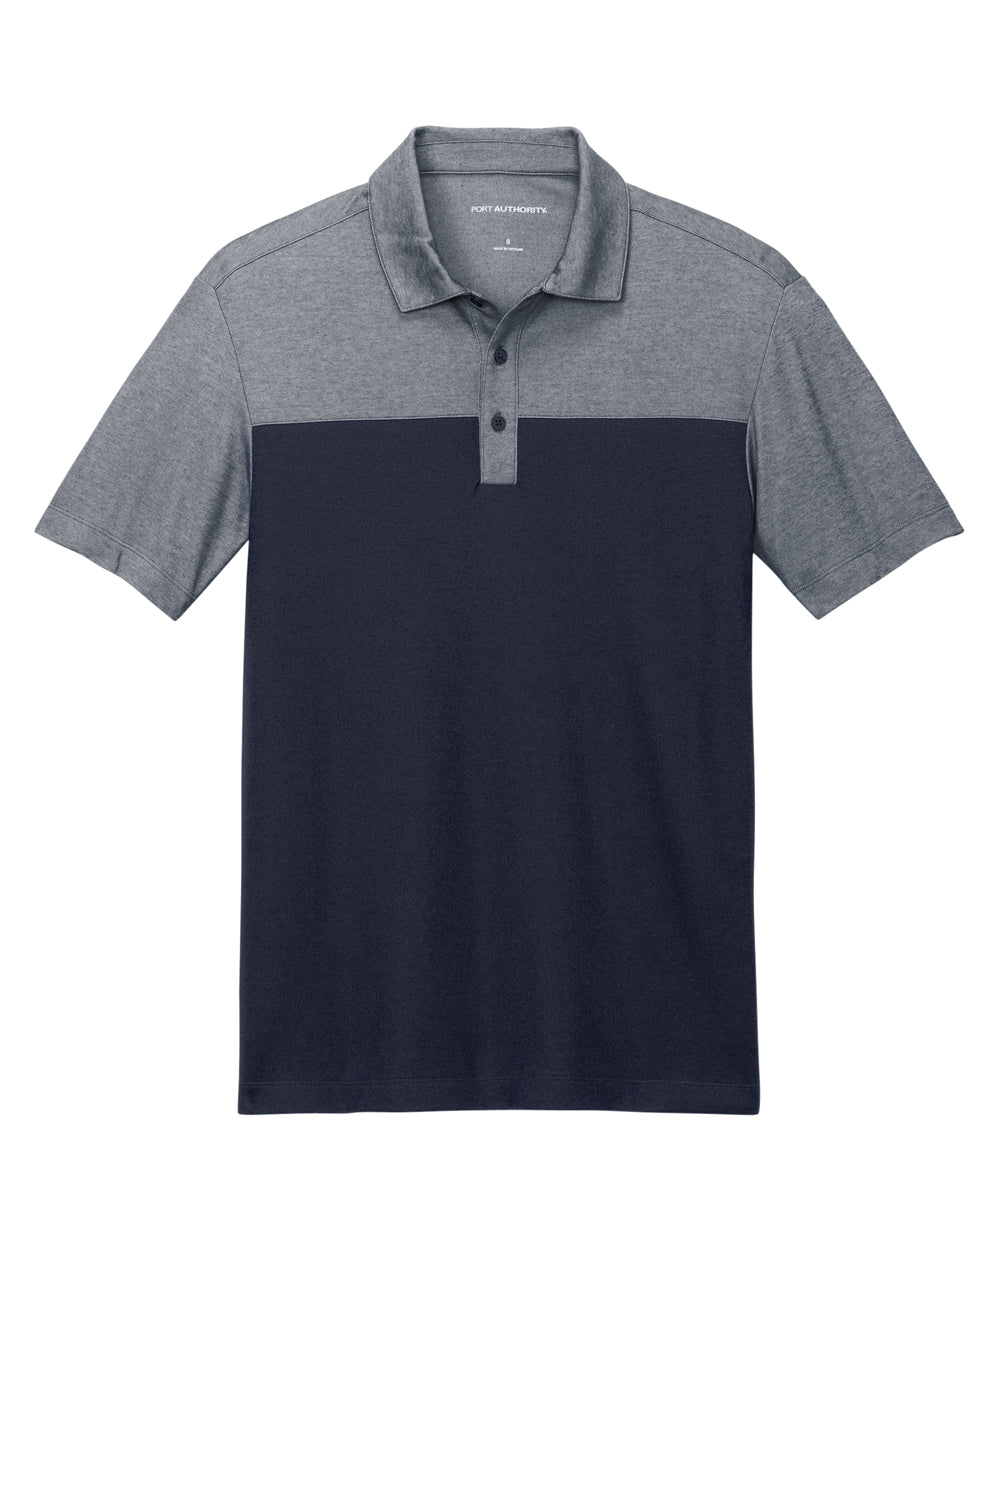 Port Authority Mens Fine Pique Blocked Short Sleeve Polo Shirt River Navy Blue/Heather River Navy Blue Flat Front